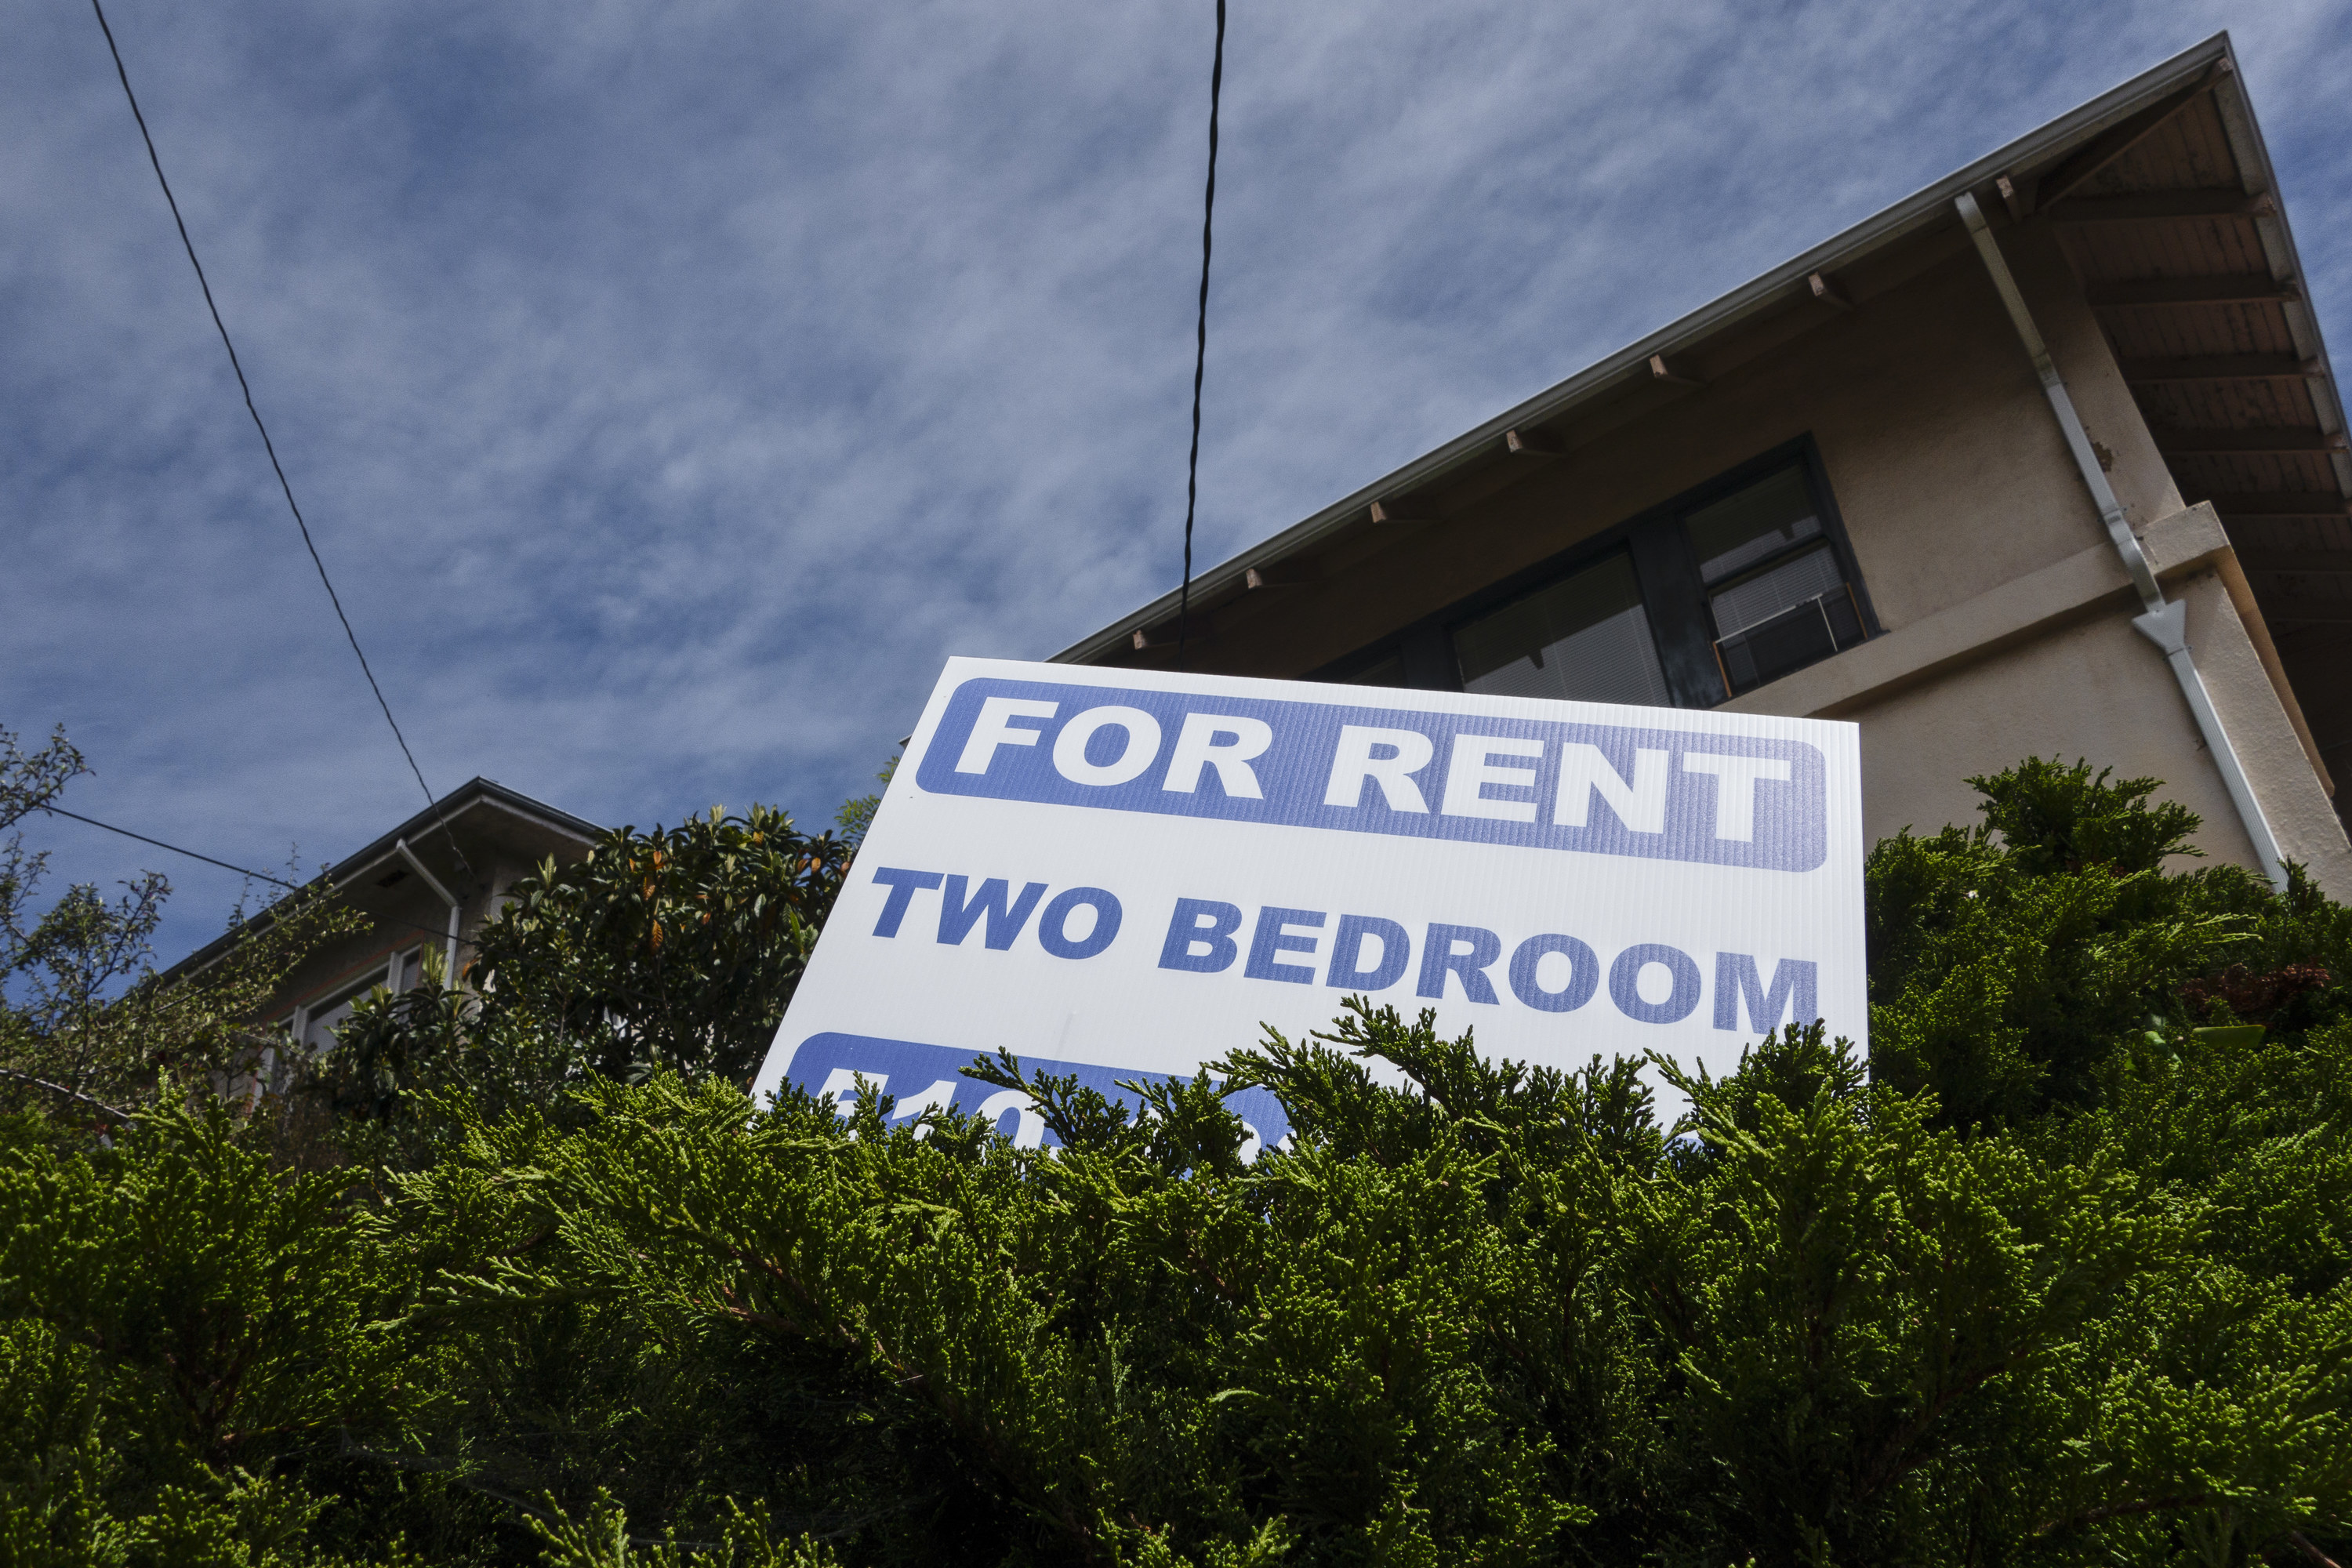 A &quot;For rent two bedroom&quot; sign in the bushes